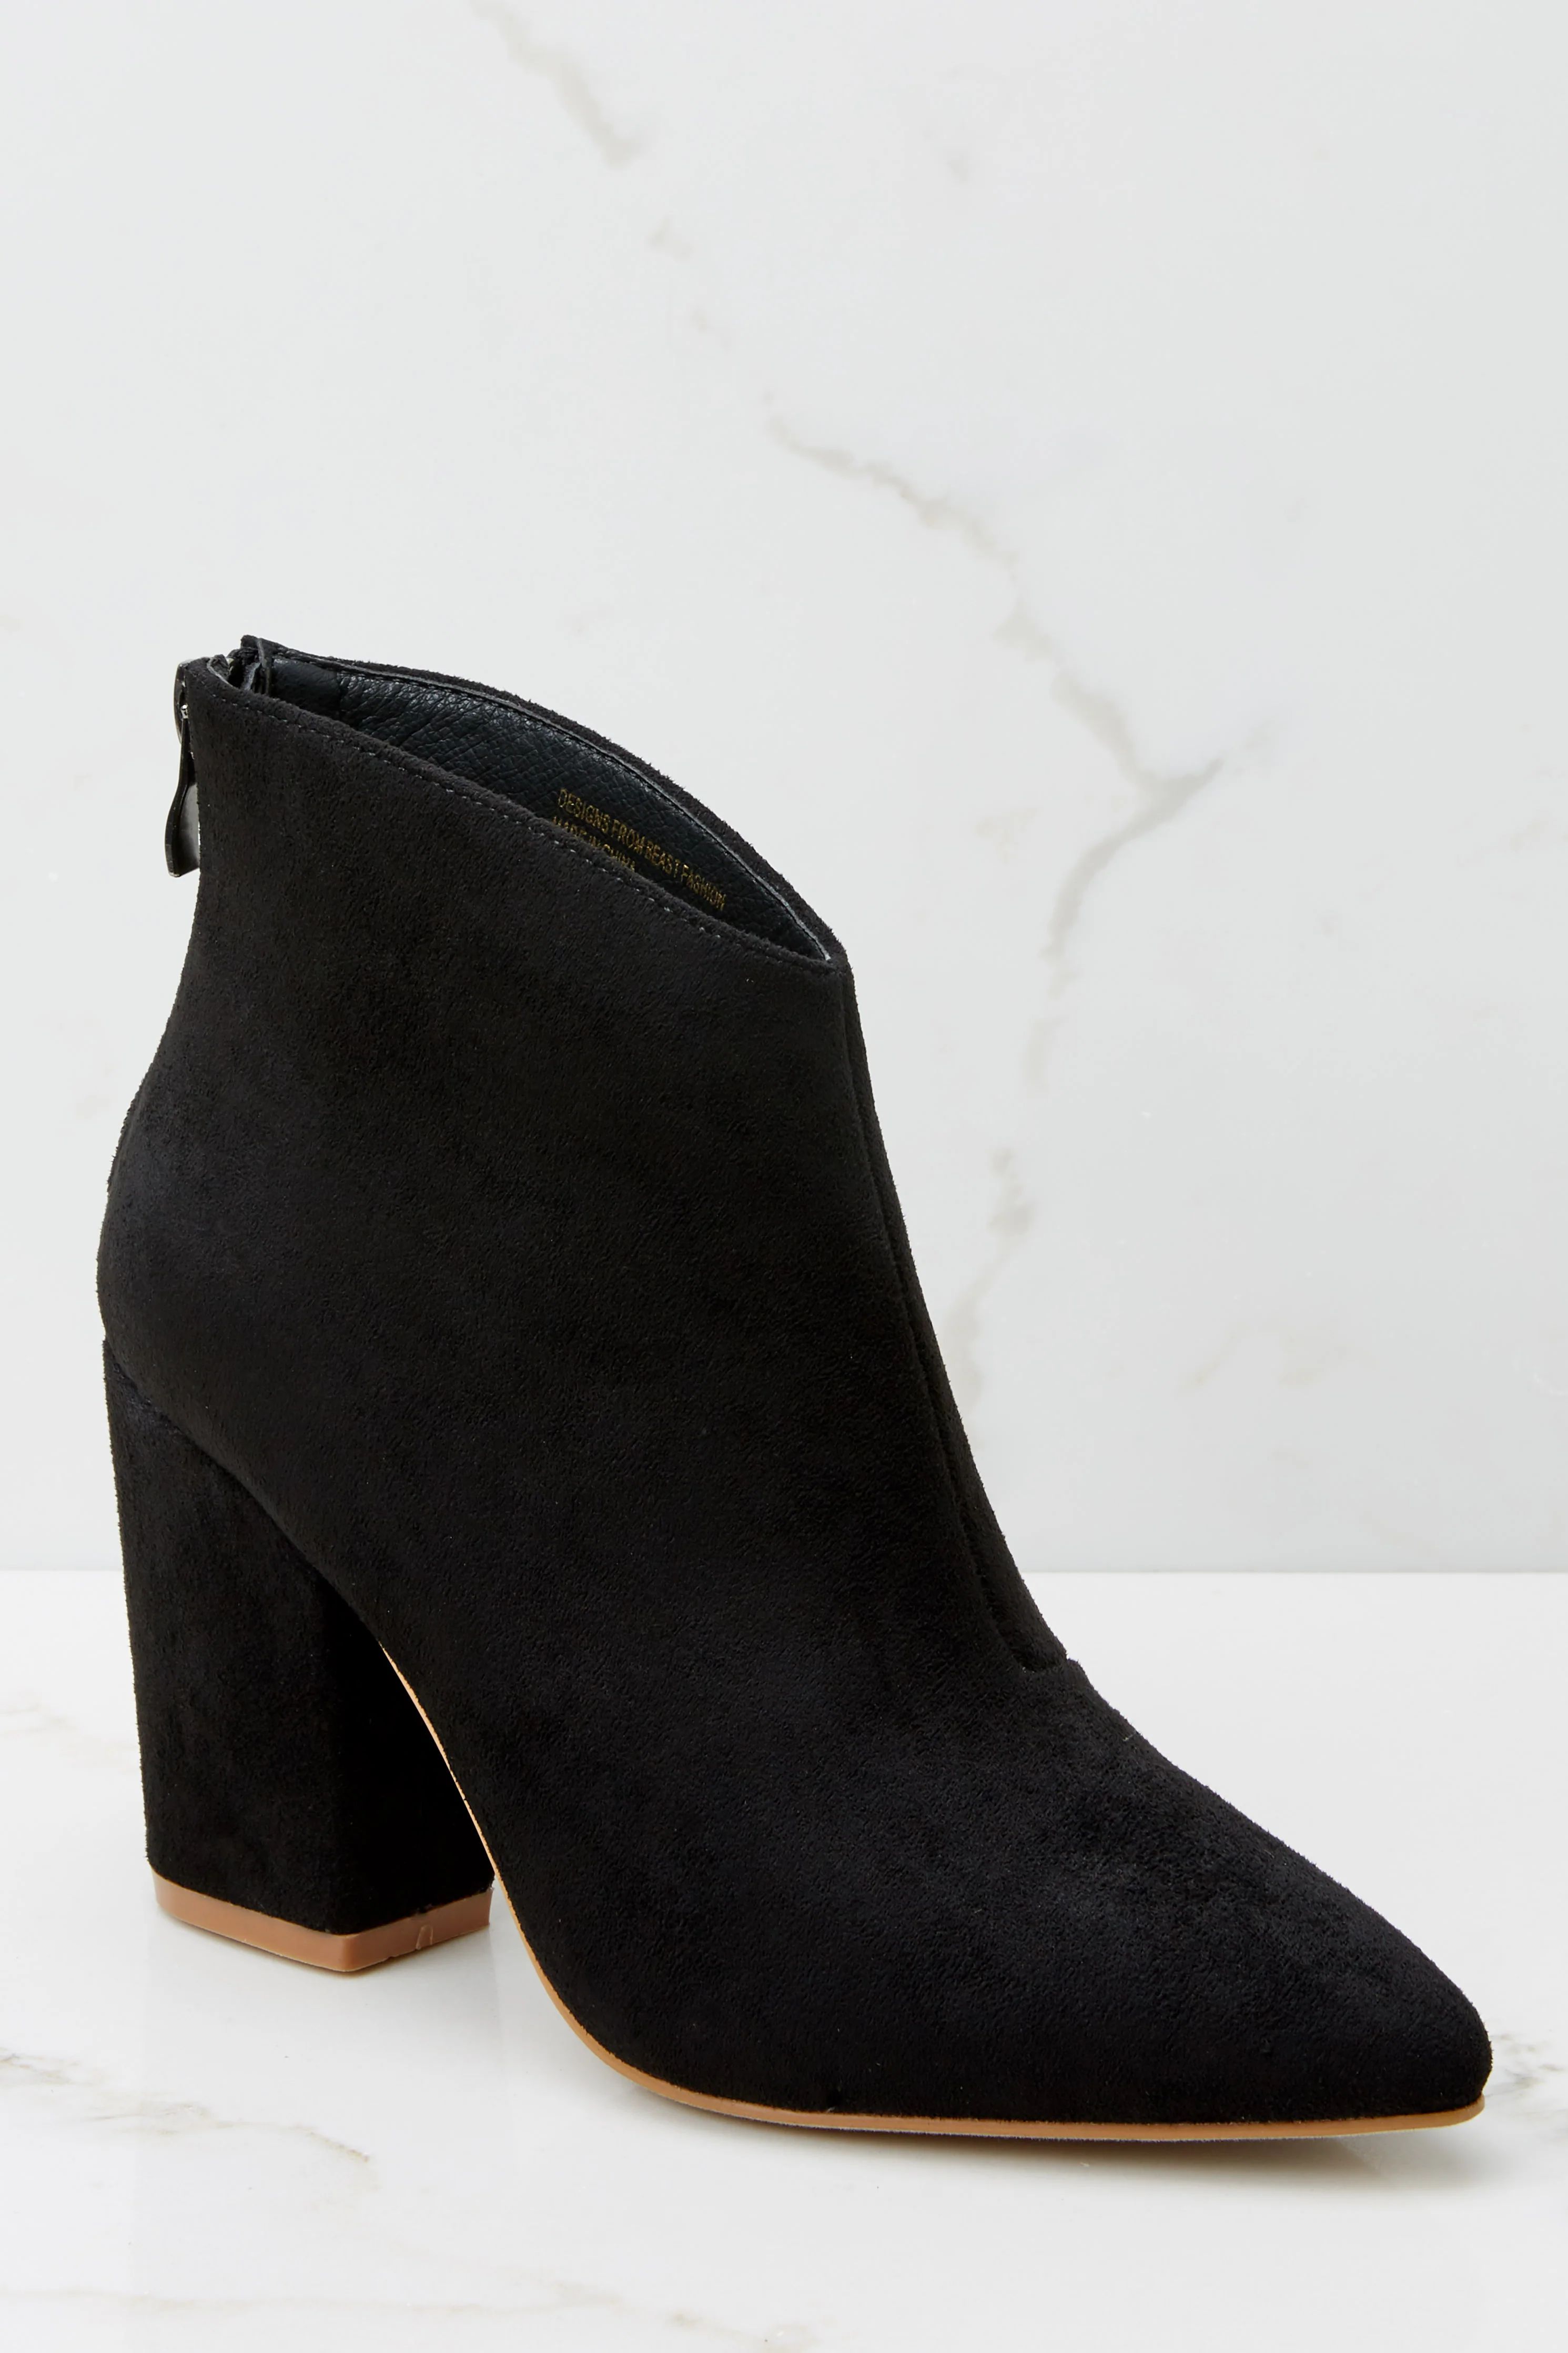 Step Towards You Black Ankle Booties | Red Dress 